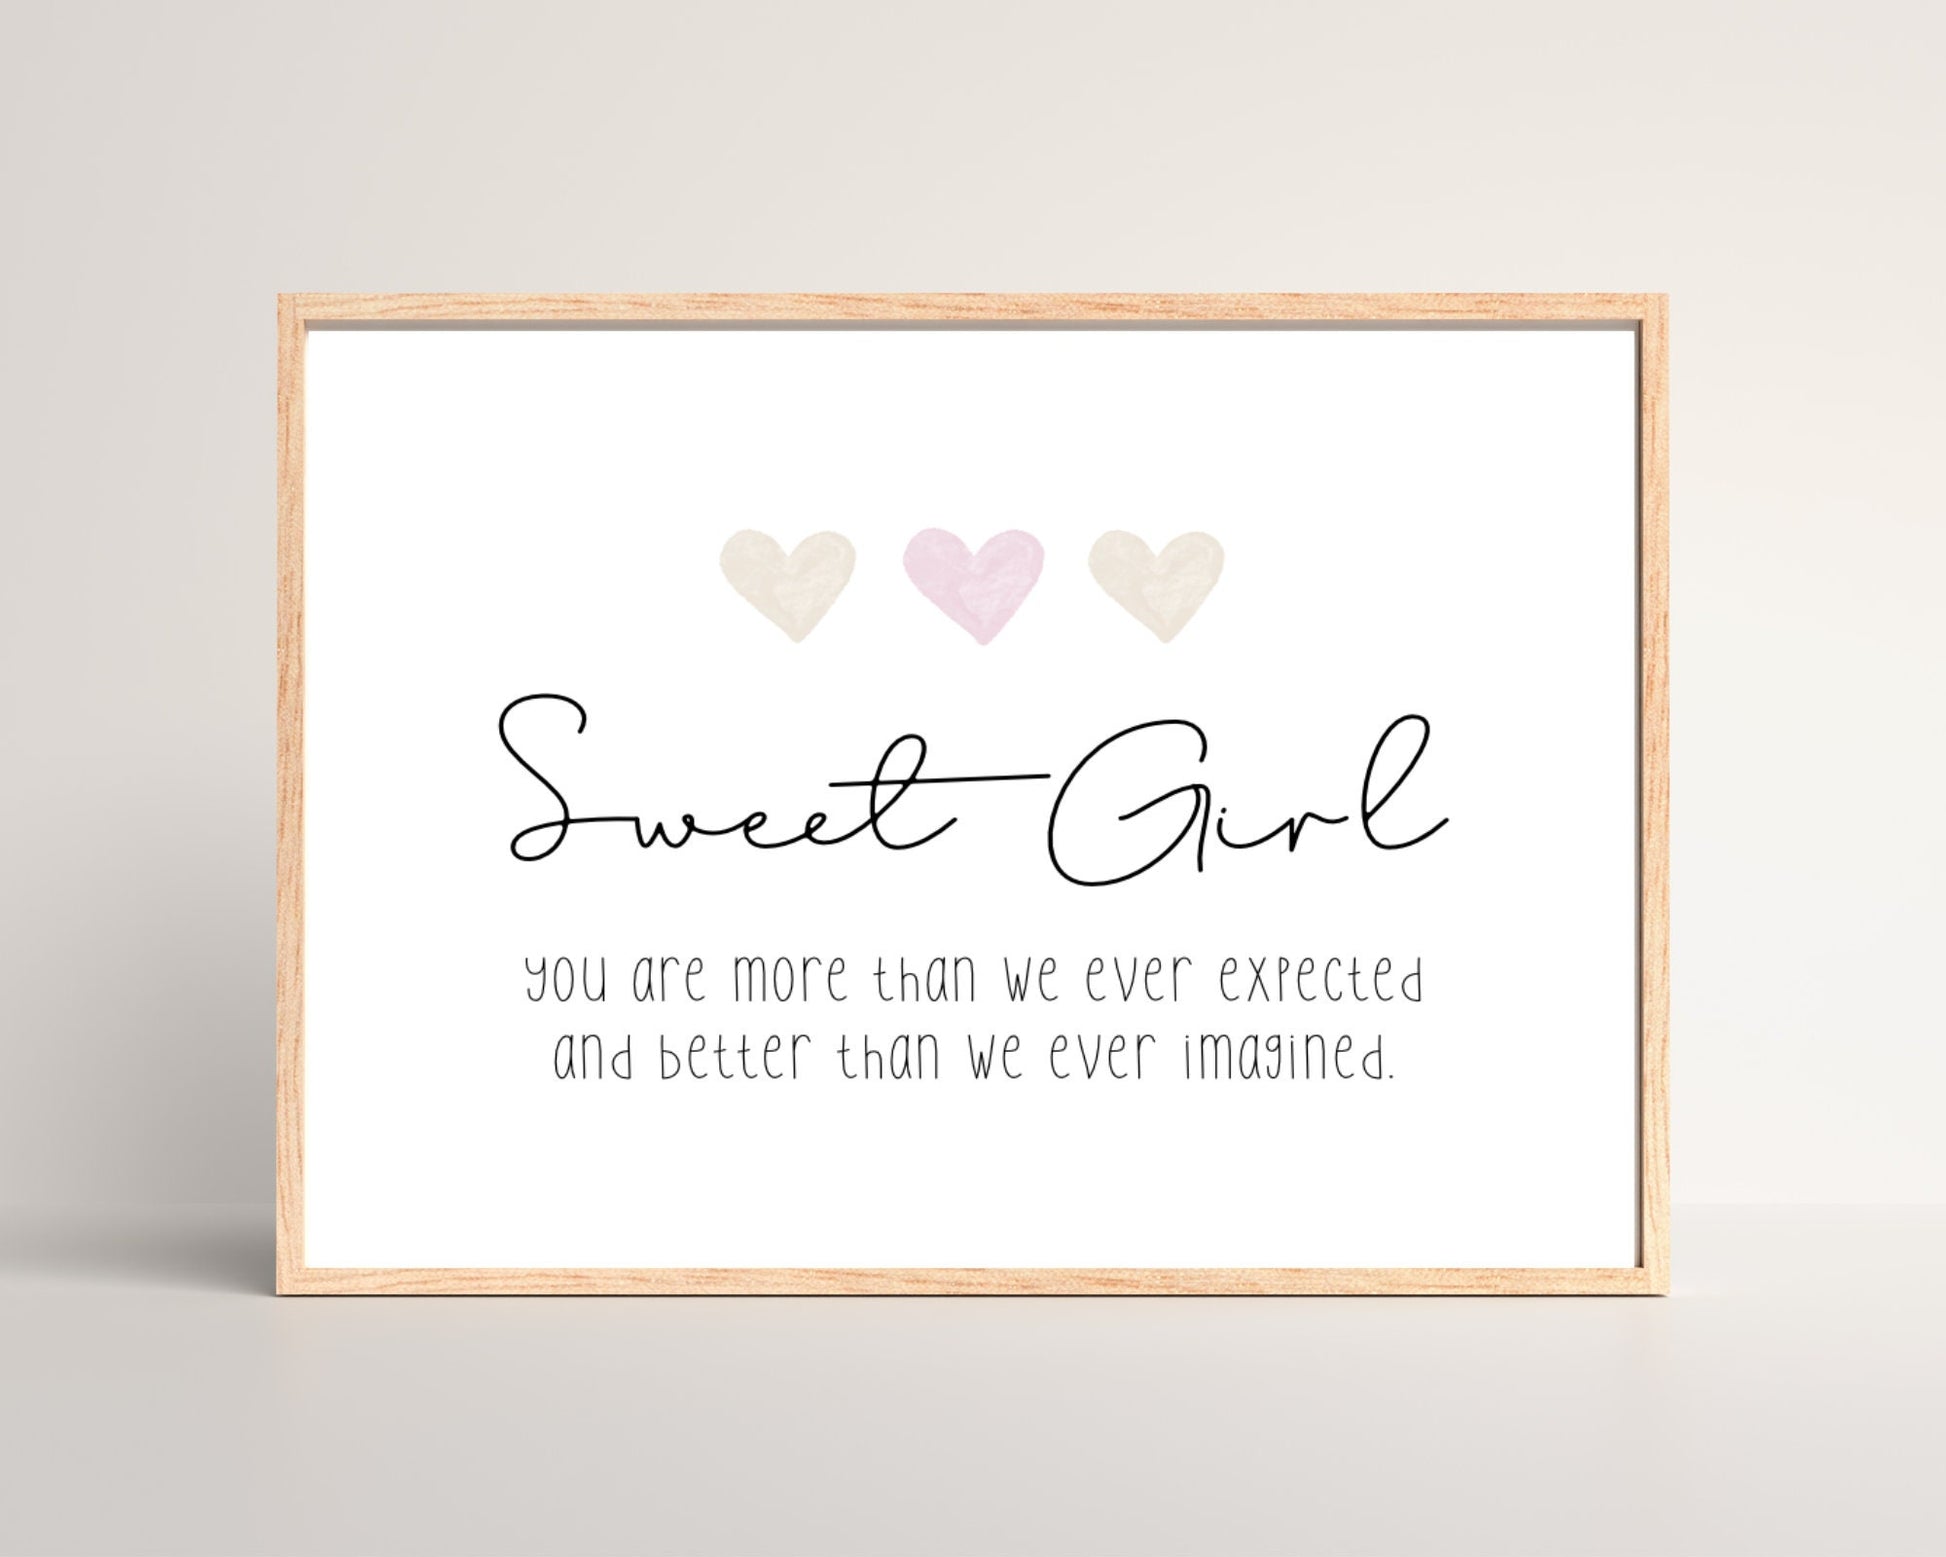 A little girl’s room digital print that has three hearts at the top, and a piece of writing that says: “Sweet girl, you are more than we ever expected and better than we ever imagined.”